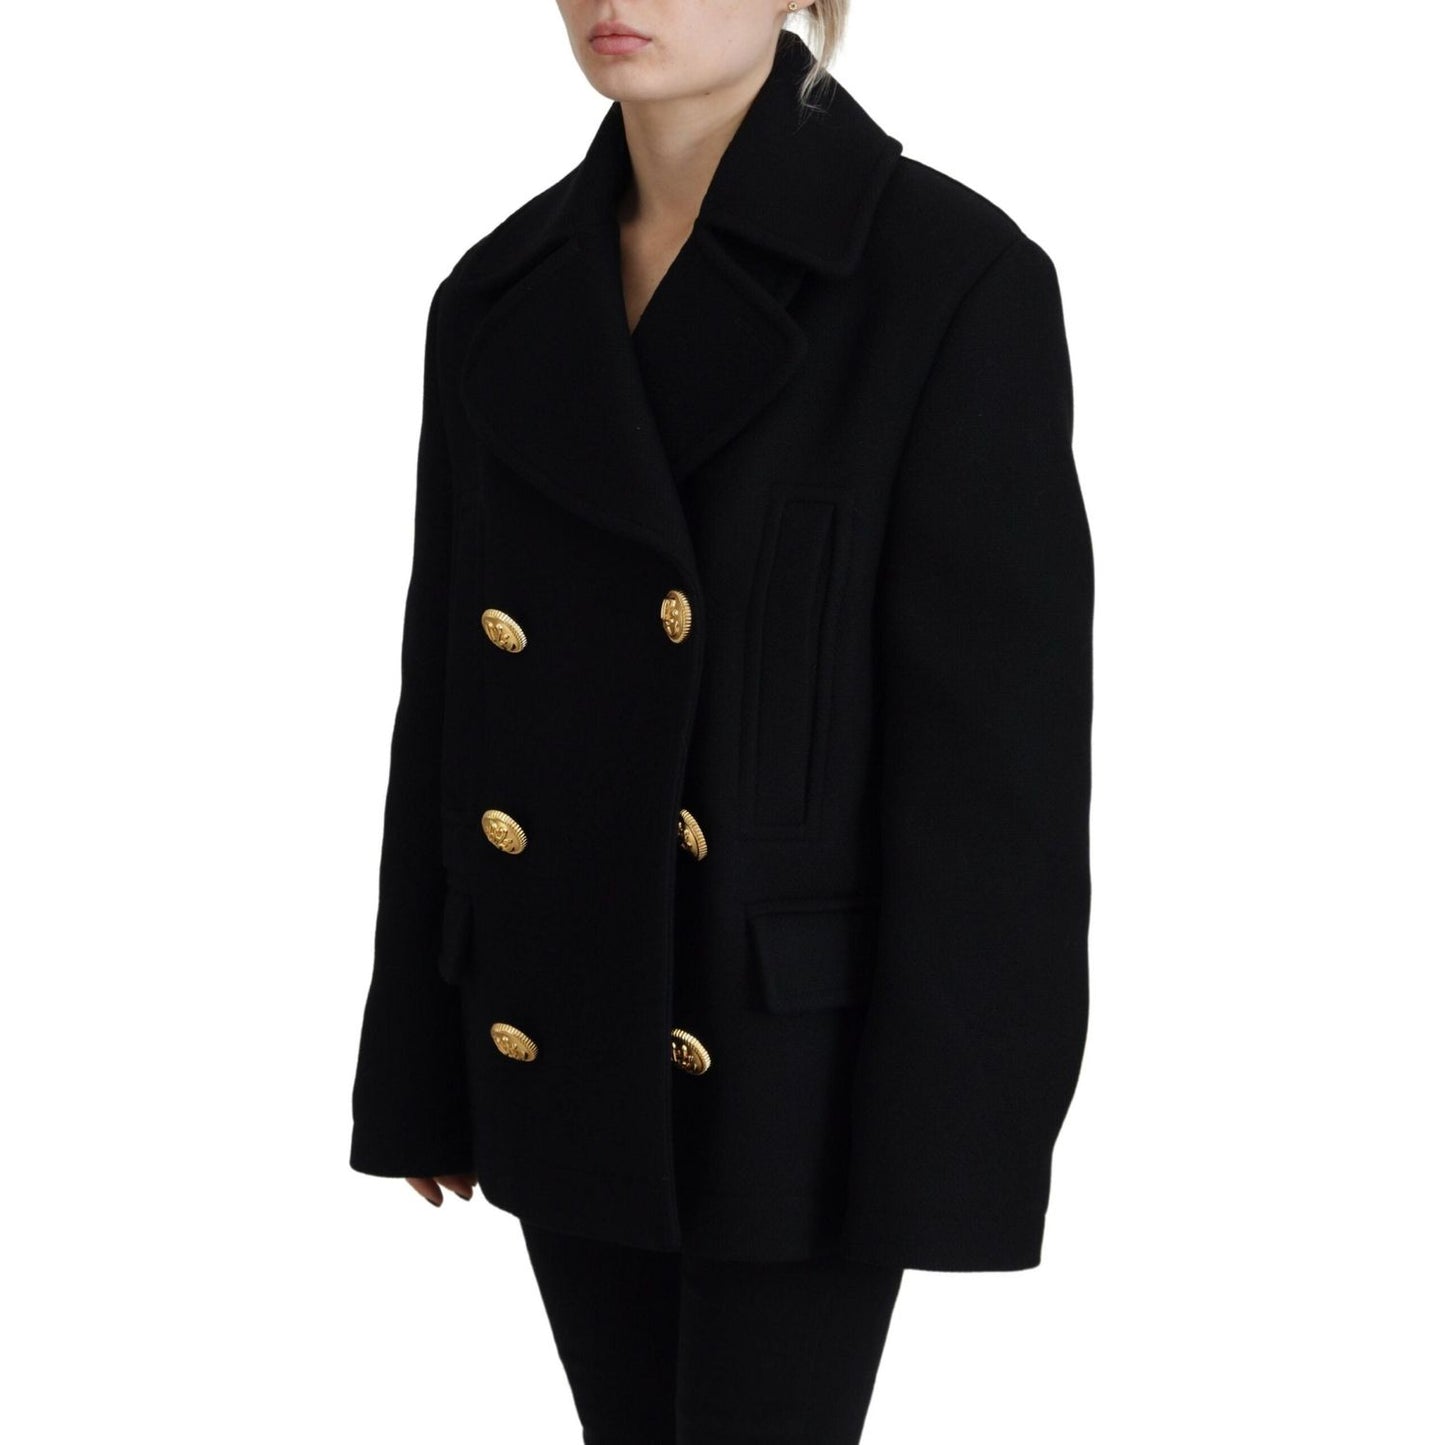 Dsquared² Black Double Breasted Coat Blazer Jacket black-double-breasted-coat-blazer-jacket-2